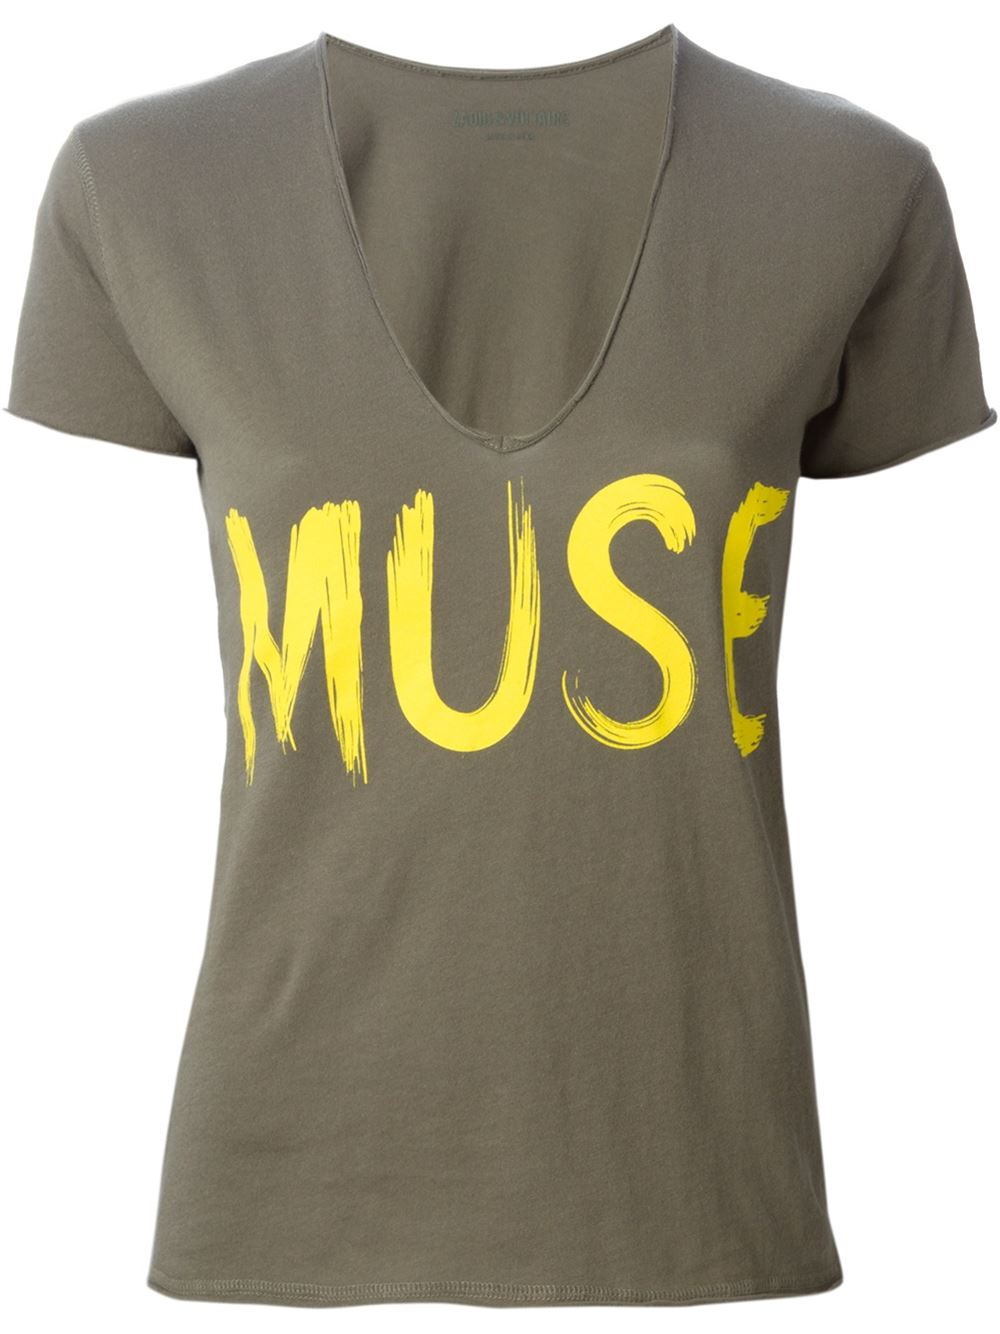 Lyst - Zadig & Voltaire 'Muse' Print T-Shirt in Green